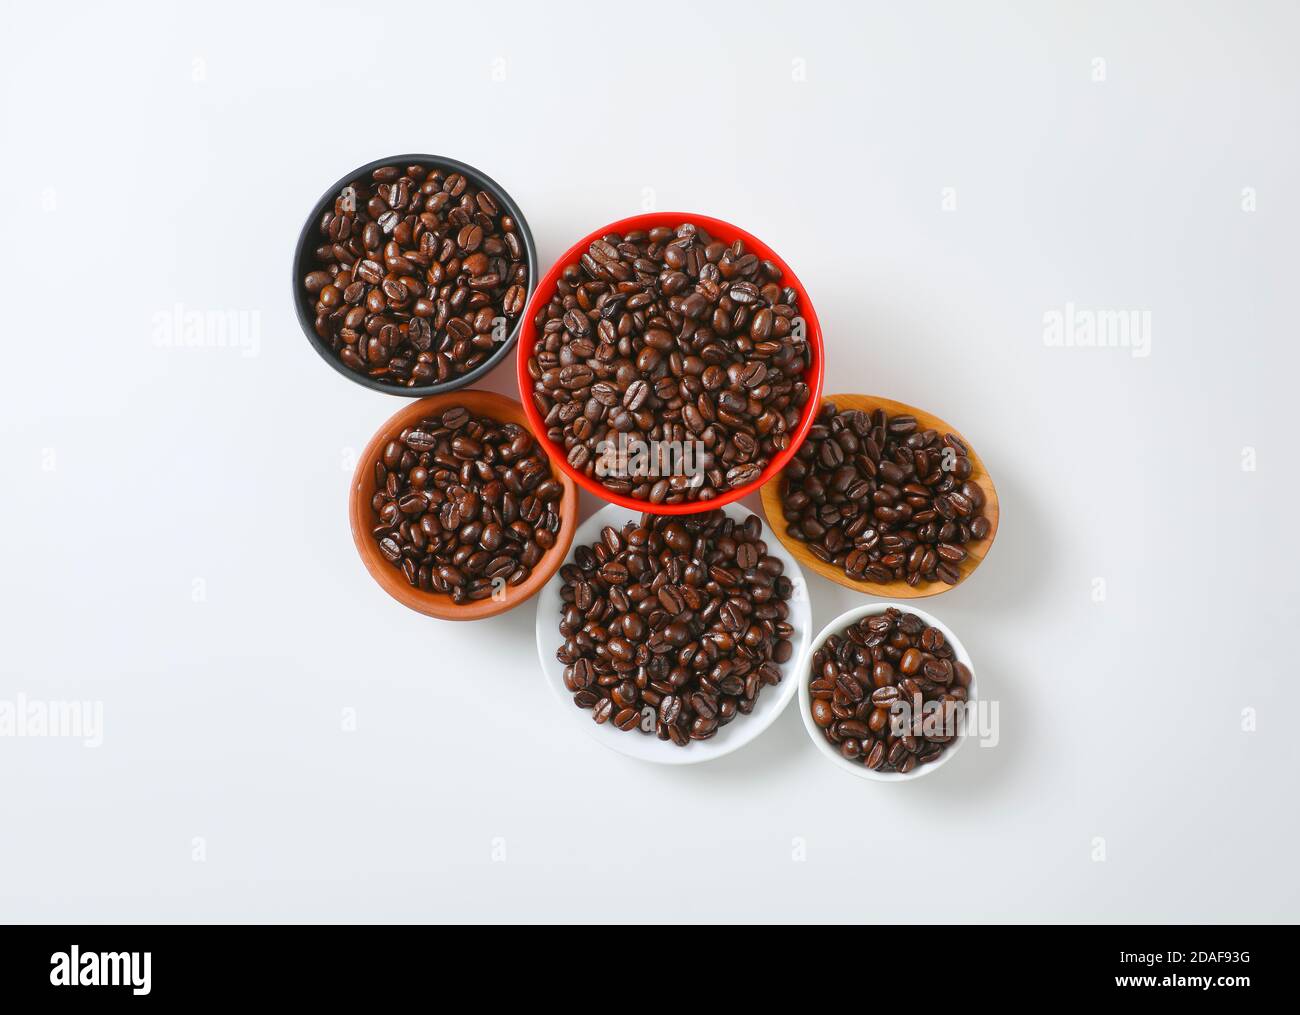 Roasted coffee beans in various bowls and on plate Stock Photo